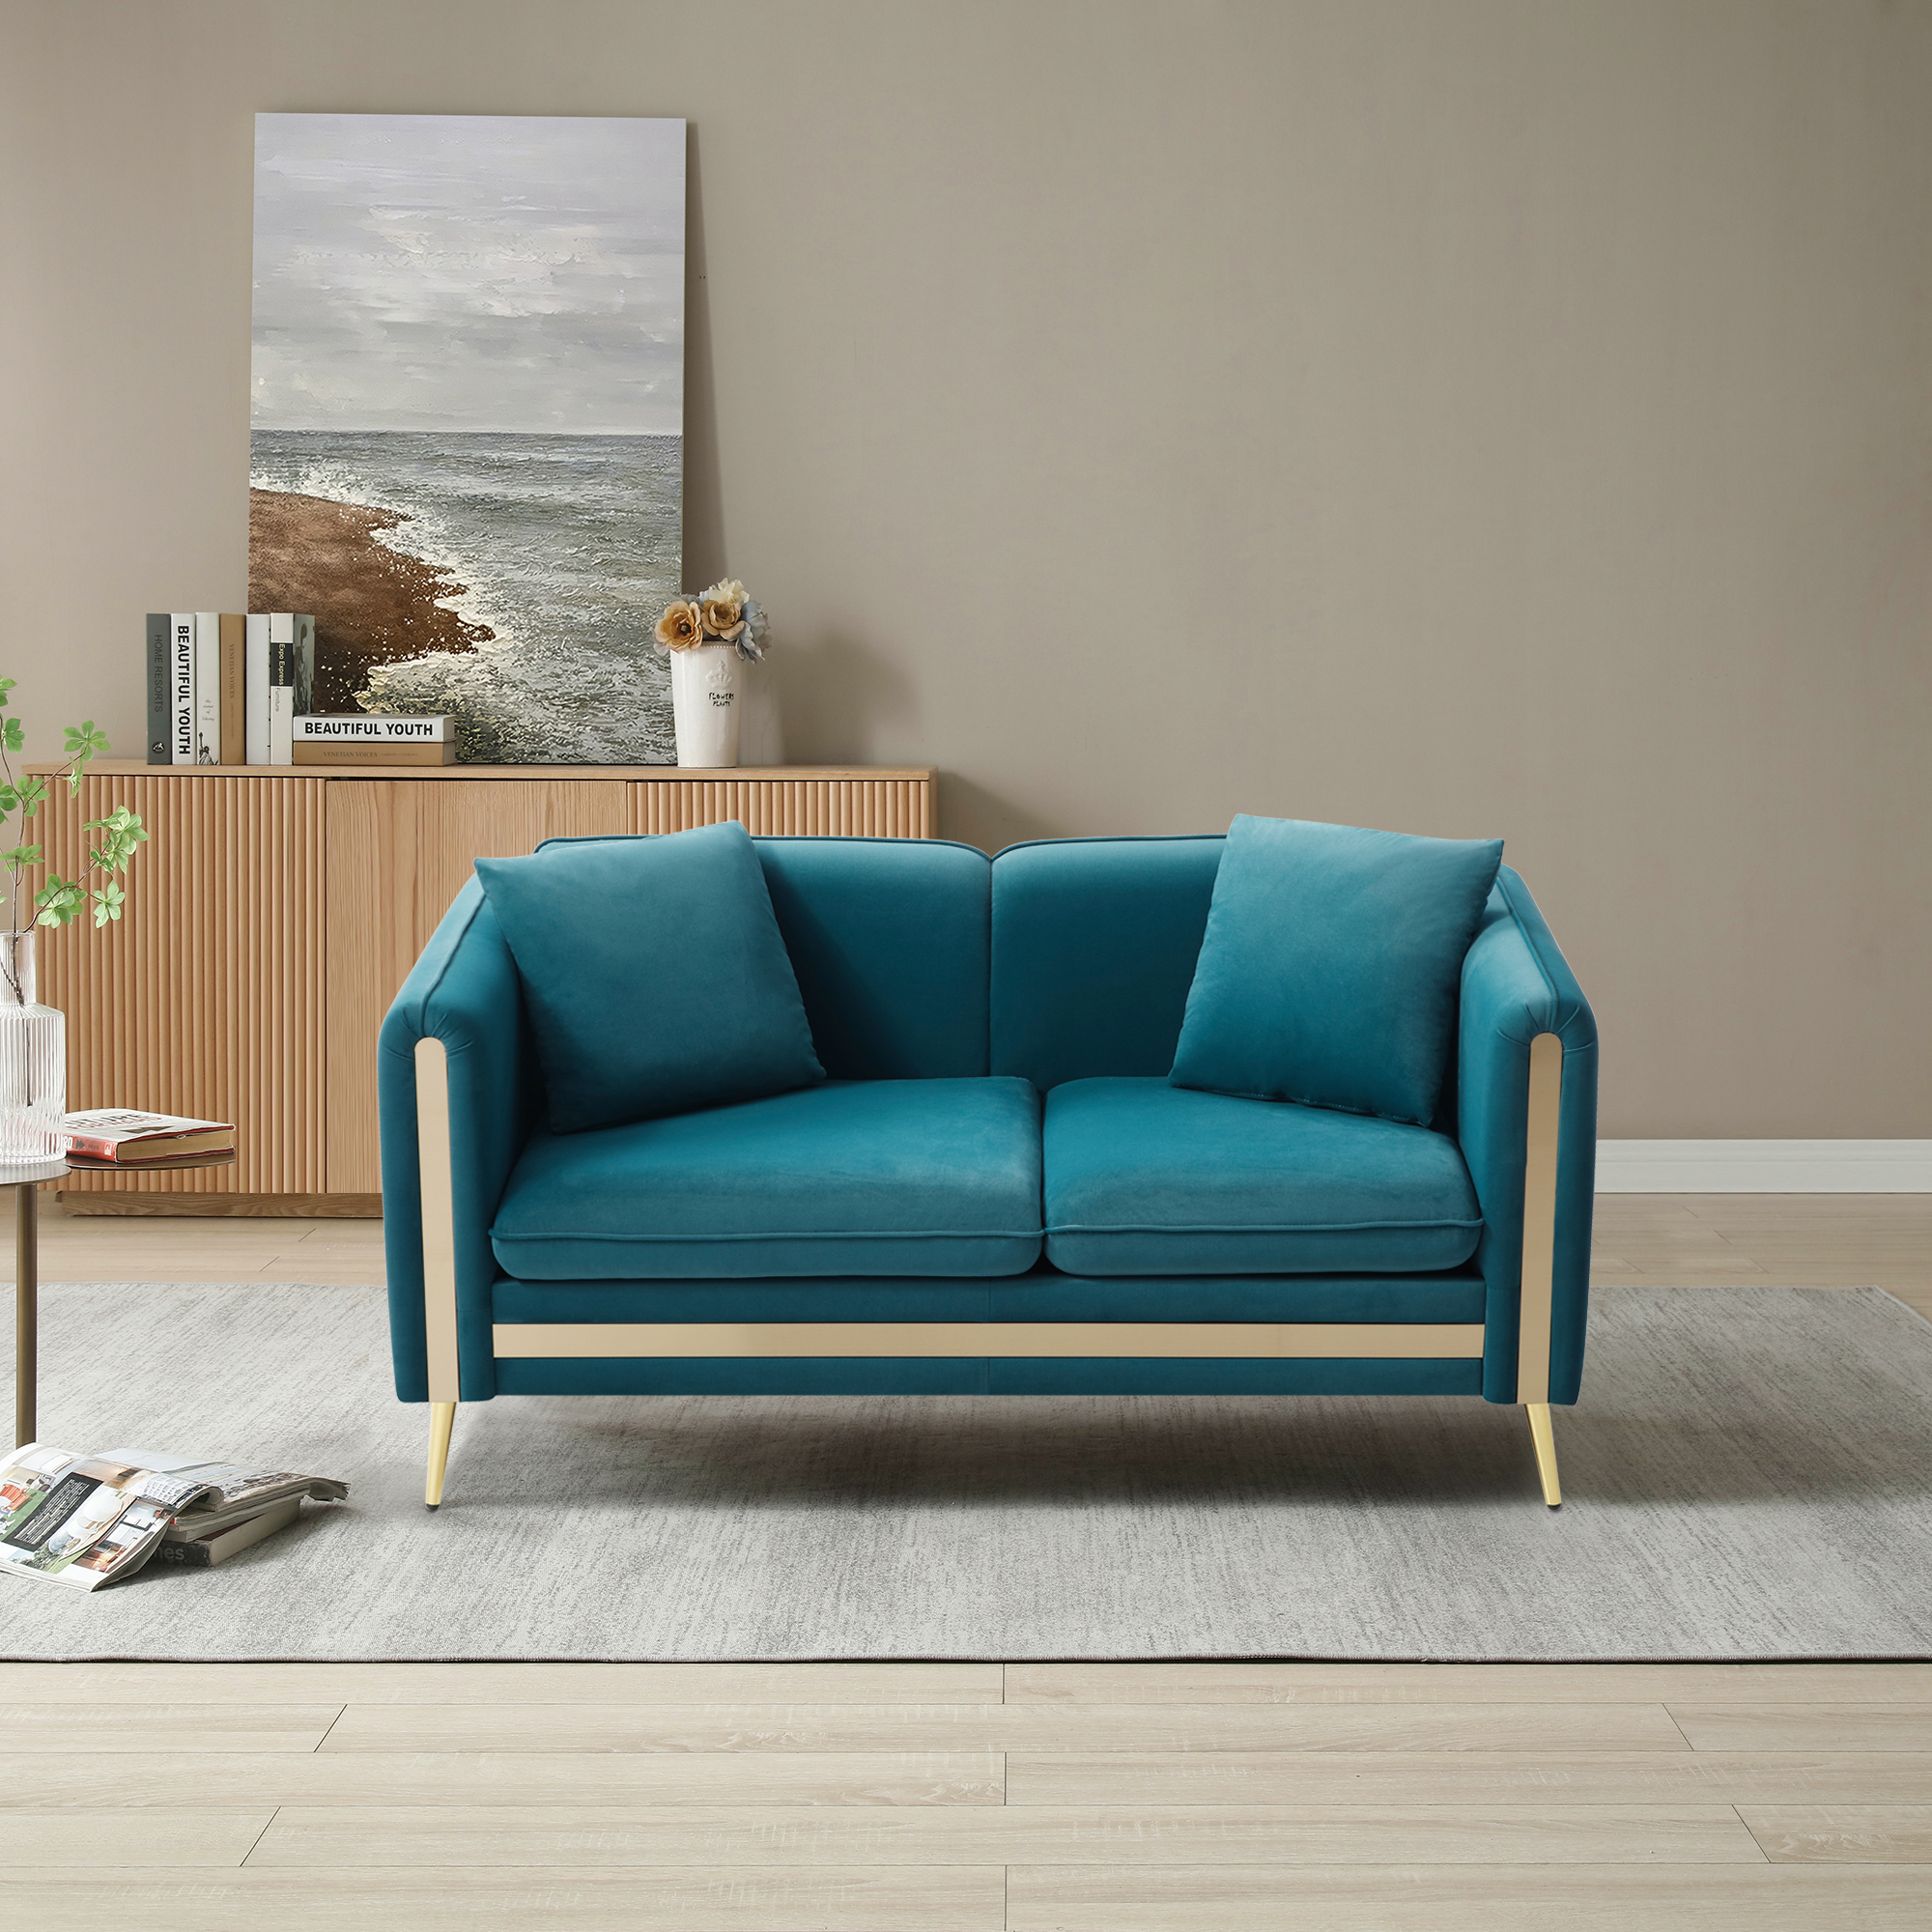 59&rdquo; Modern Upholstered Velvet Loveseat Sofa 2 Seater Couch with Removable Cushions Side Pocket Mid-Century Tufted Living Room Set Gold Metal Legs,2 Pillows Included,Teal-CASAINC